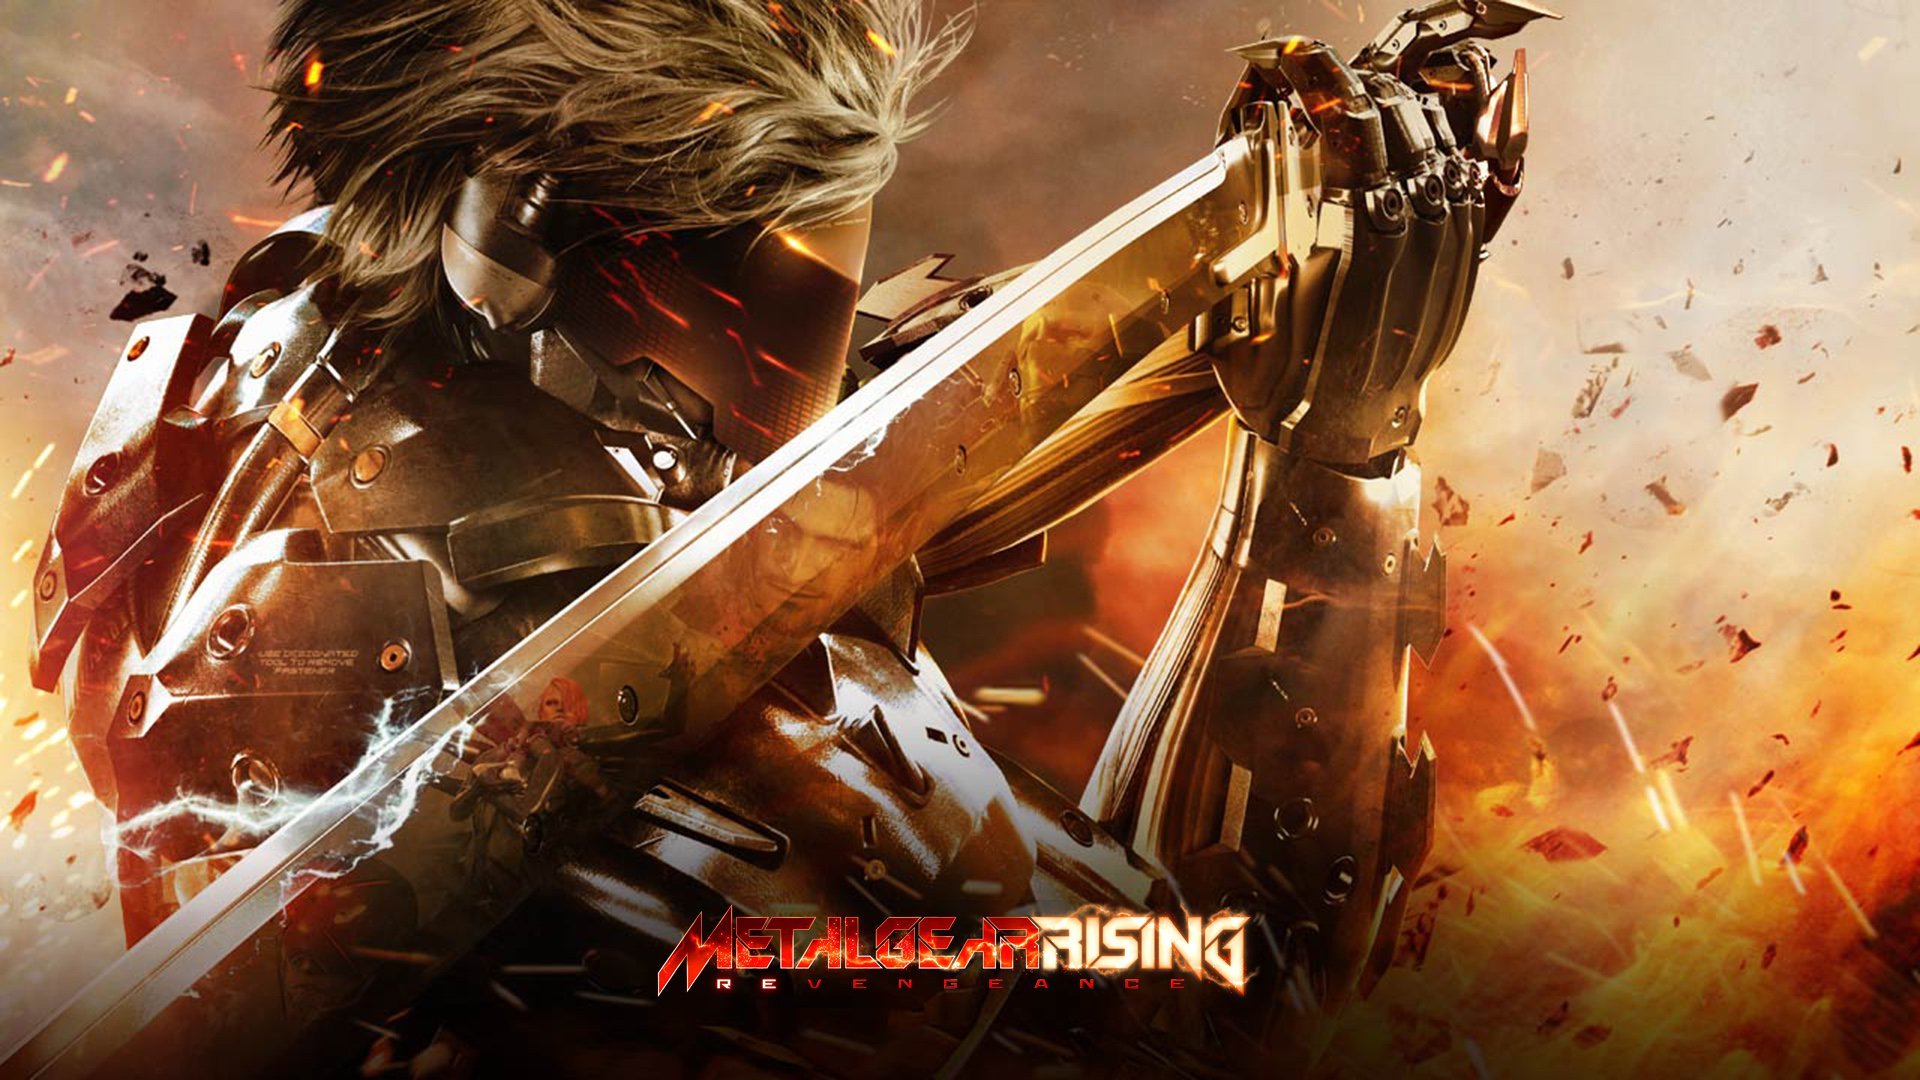 Awesome Metal Gear Rising: Revengeance (MGR) free wallpaper ID:130615 for full hd 1920x1080 PC